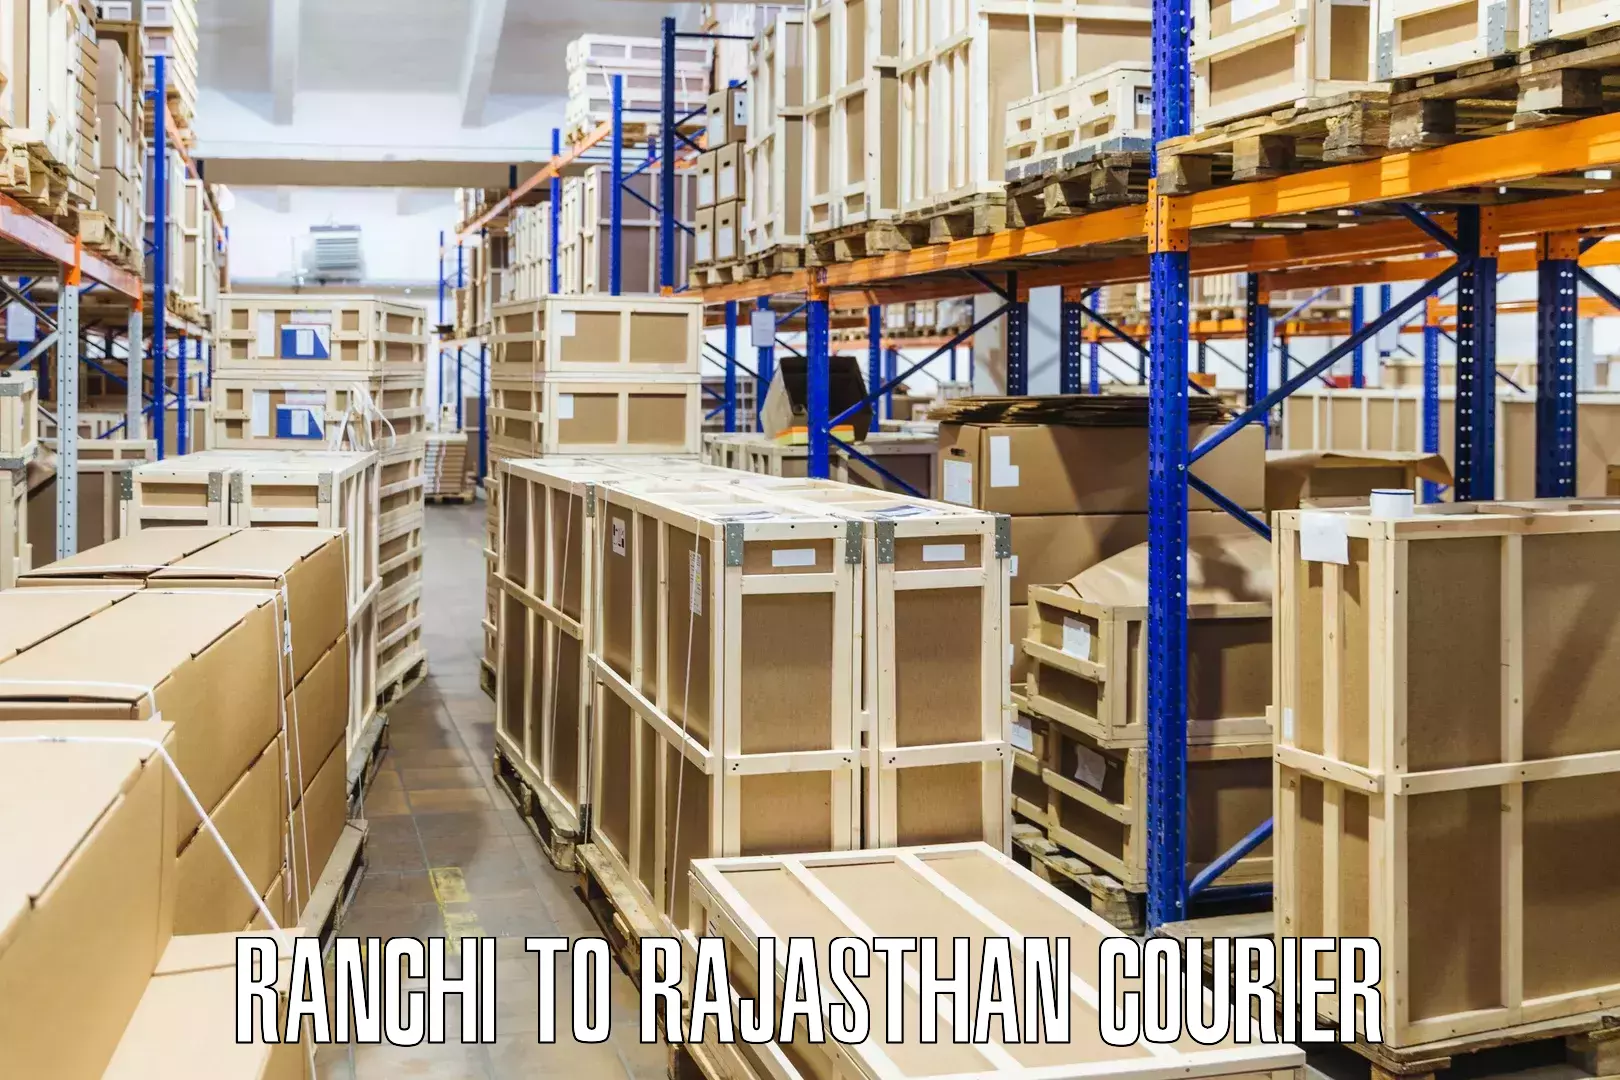 Comprehensive shipping network Ranchi to Shrimadhopur